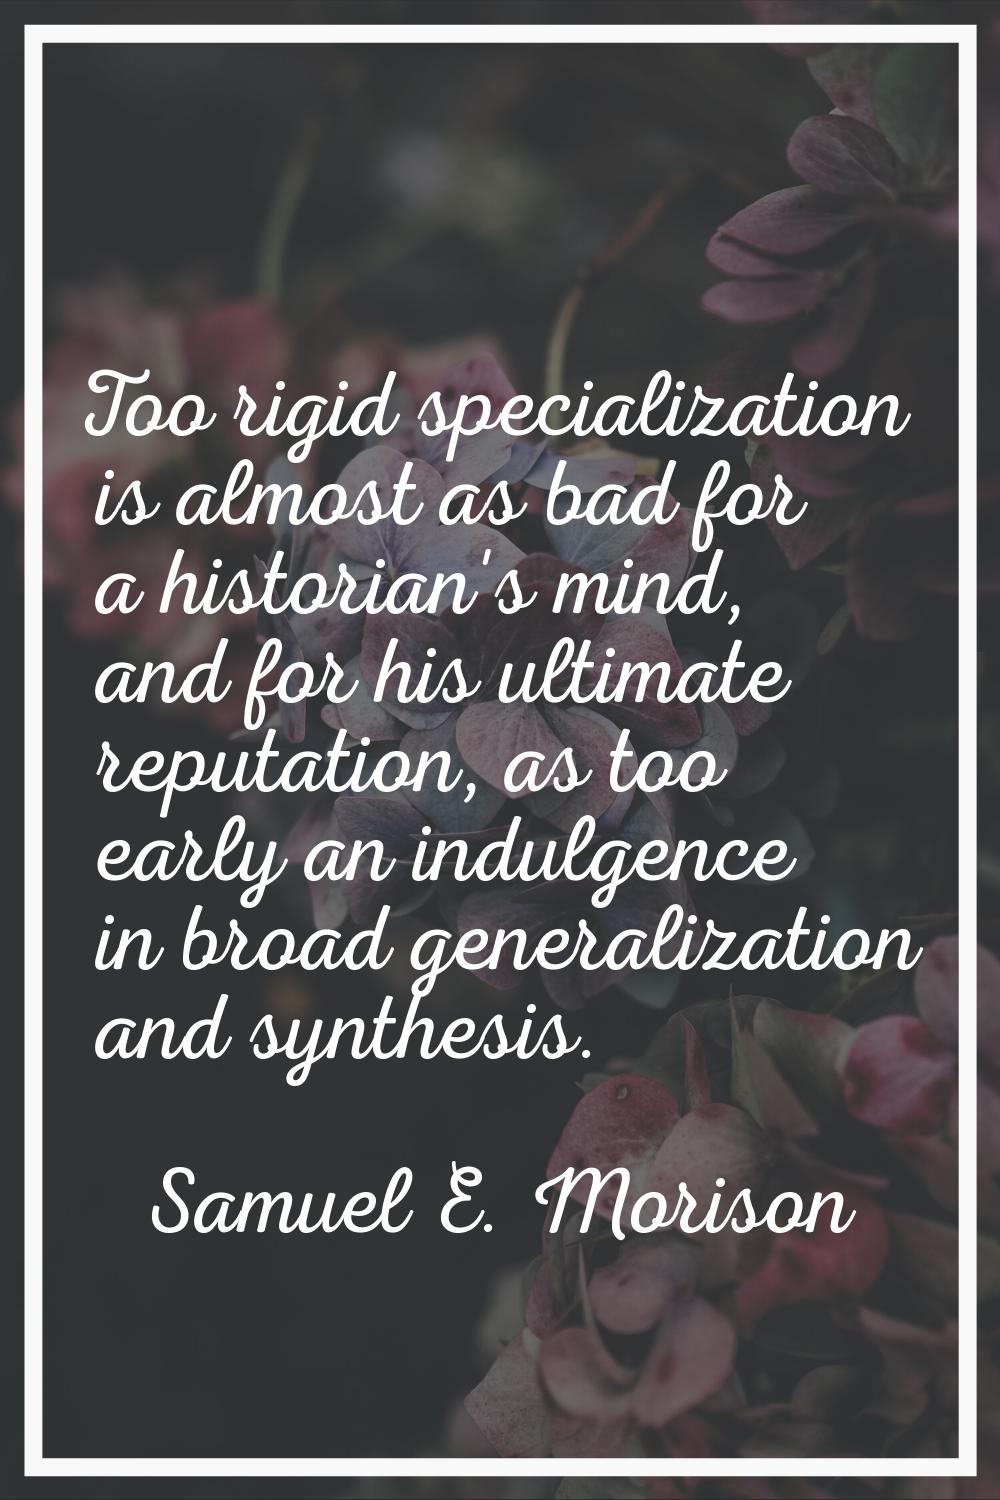 Too rigid specialization is almost as bad for a historian's mind, and for his ultimate reputation, 